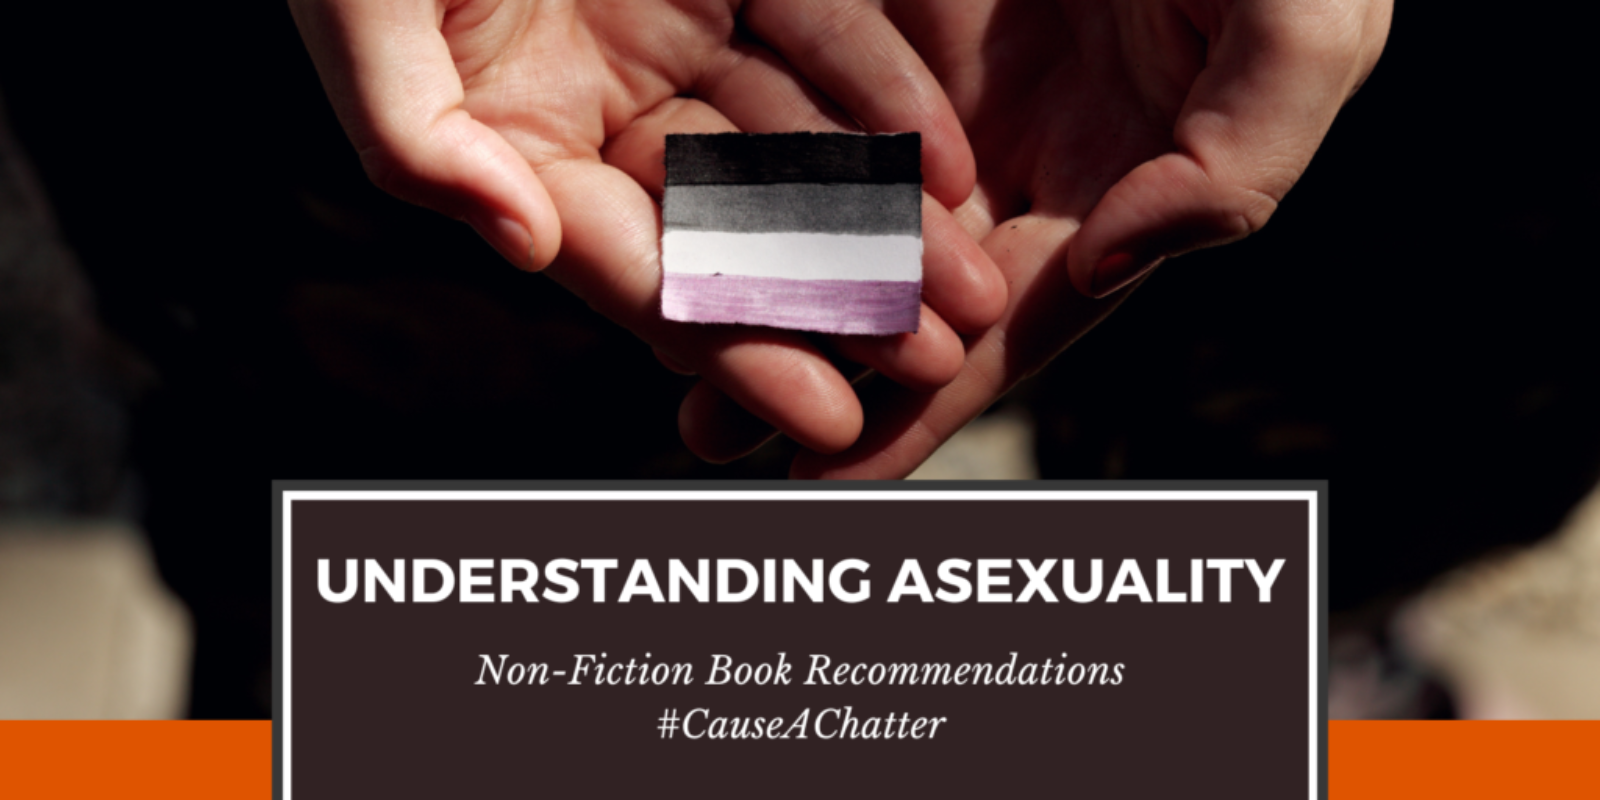 Understanding Asexuality Non-Fiction Book Recommendations